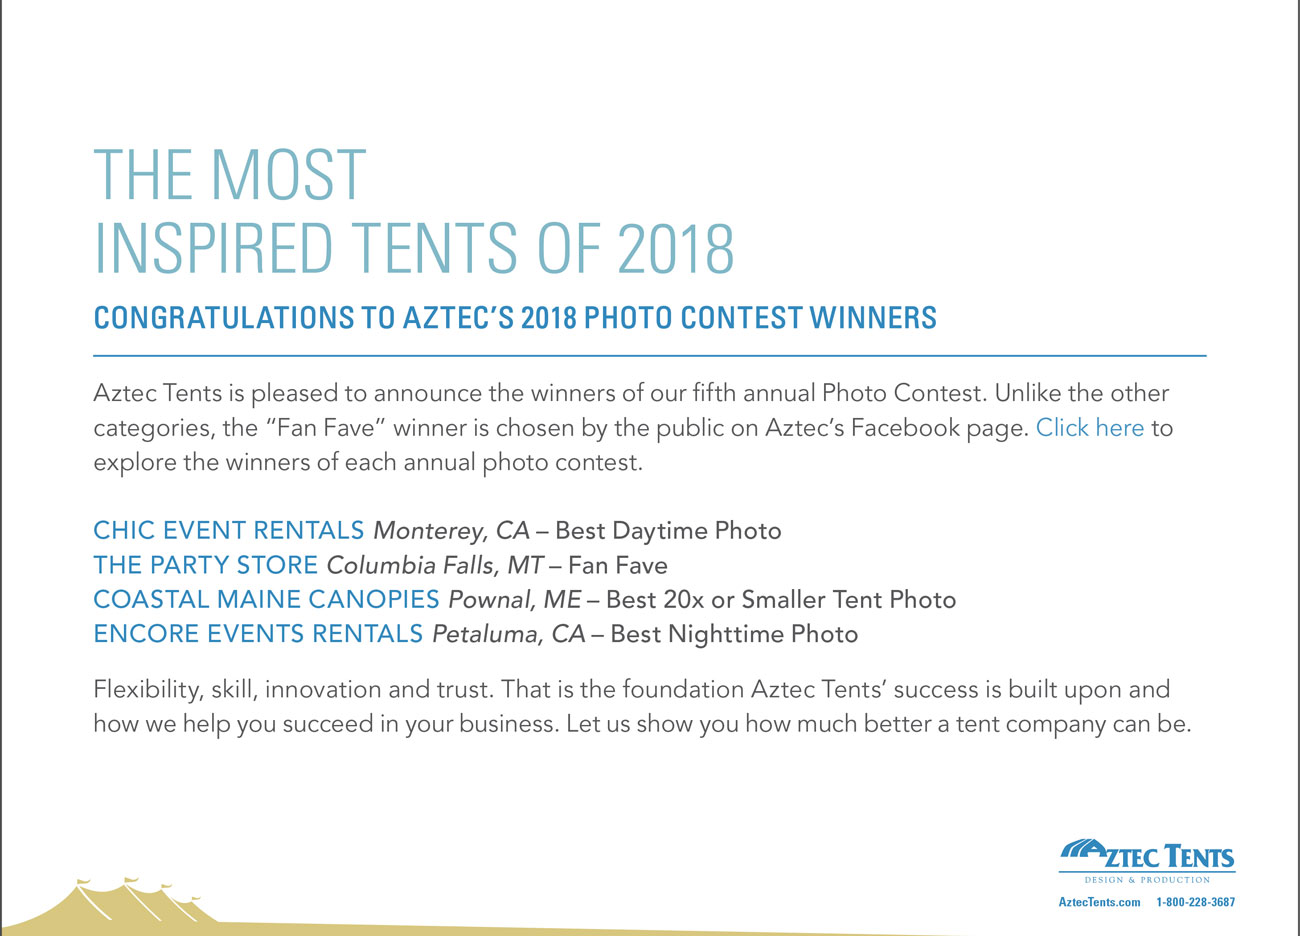 THE MOST INSPIRED TENTS OF 2018 CONGRATULATIONS TO AZTEC’S 2018 PHOTO CONTEST WINNERS
    - Aztec Tents is pleased to announce the winners of our fifth annual Photo Contest. Unlike the other categories, the “Fan Fave” winner is chosen by the public on Aztec’s Facebook page. Click here to
	explore the winners of each annual photo contest.
	- CHIC EVENT RENTALS Monterey, CA – Best Daytime Photo
	THE PARTY STORE Columbia Falls, MT – Fan Fave
	COASTAL MAINE CANOPIES Pownal, ME – Best 20x or Smaller Tent Photo
	ENCORE EVENTS RENTALS Petaluma, CA – Best Nighttime Photo
	- Flexibility, skill, innovation and trust. That is the foundation Aztec Tents’ success is built upon and how we help you succeed in your business. Let us show you how much better a tent company can be.
	- AZTEC TENTS - DESIGN & PRODUCTION - AztecTents.com 1-800-228-3687